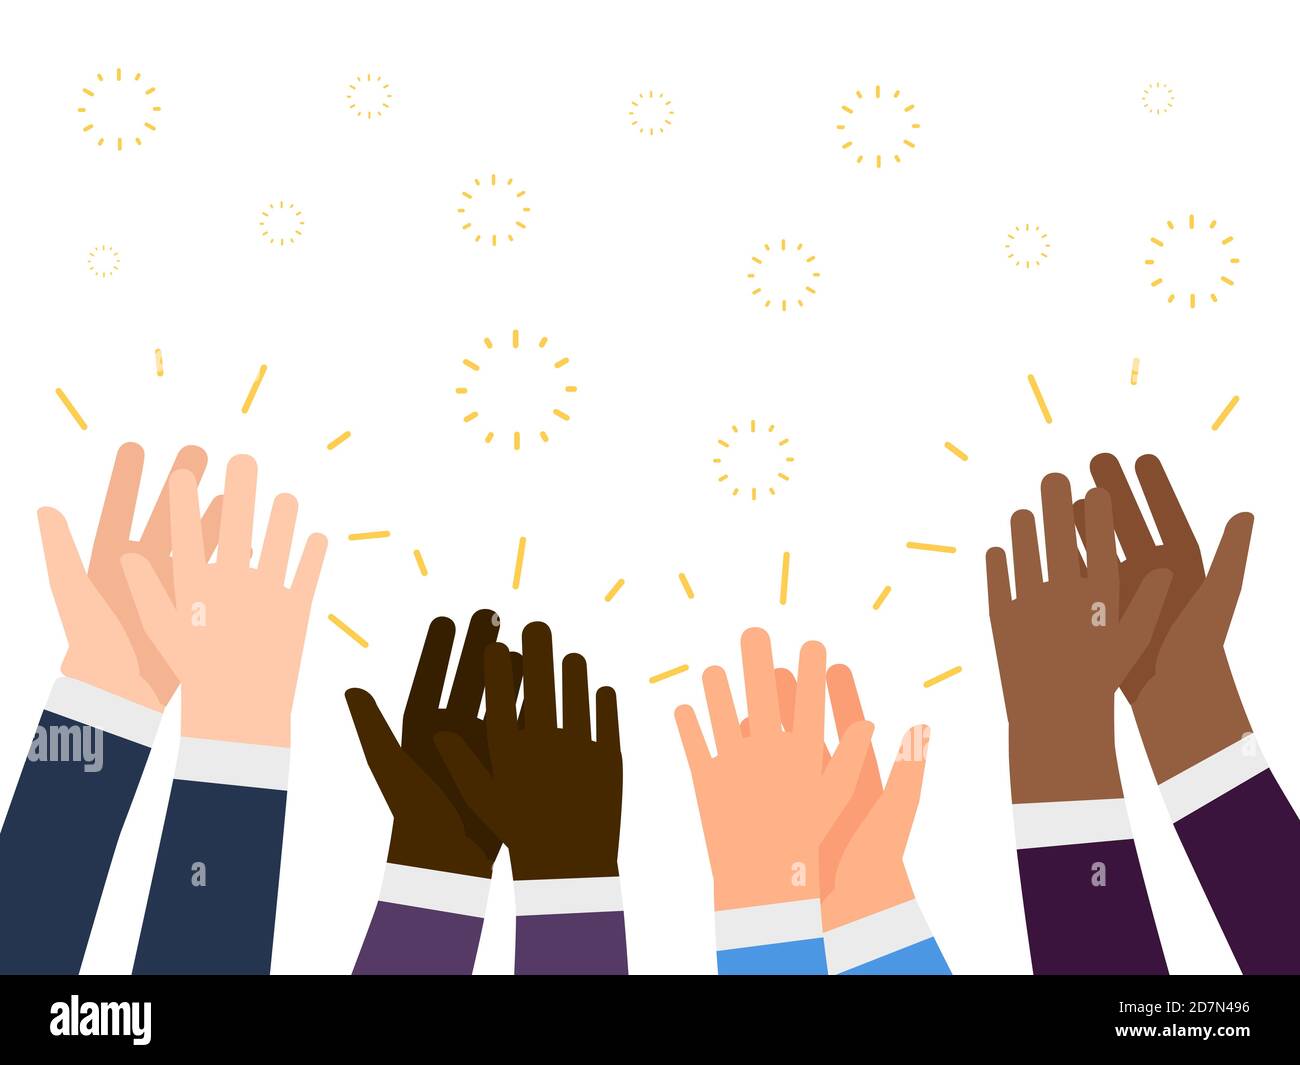 Applause flat illustration. International people hands clapping vector concept. Applause gesture, people support clap Stock Vector